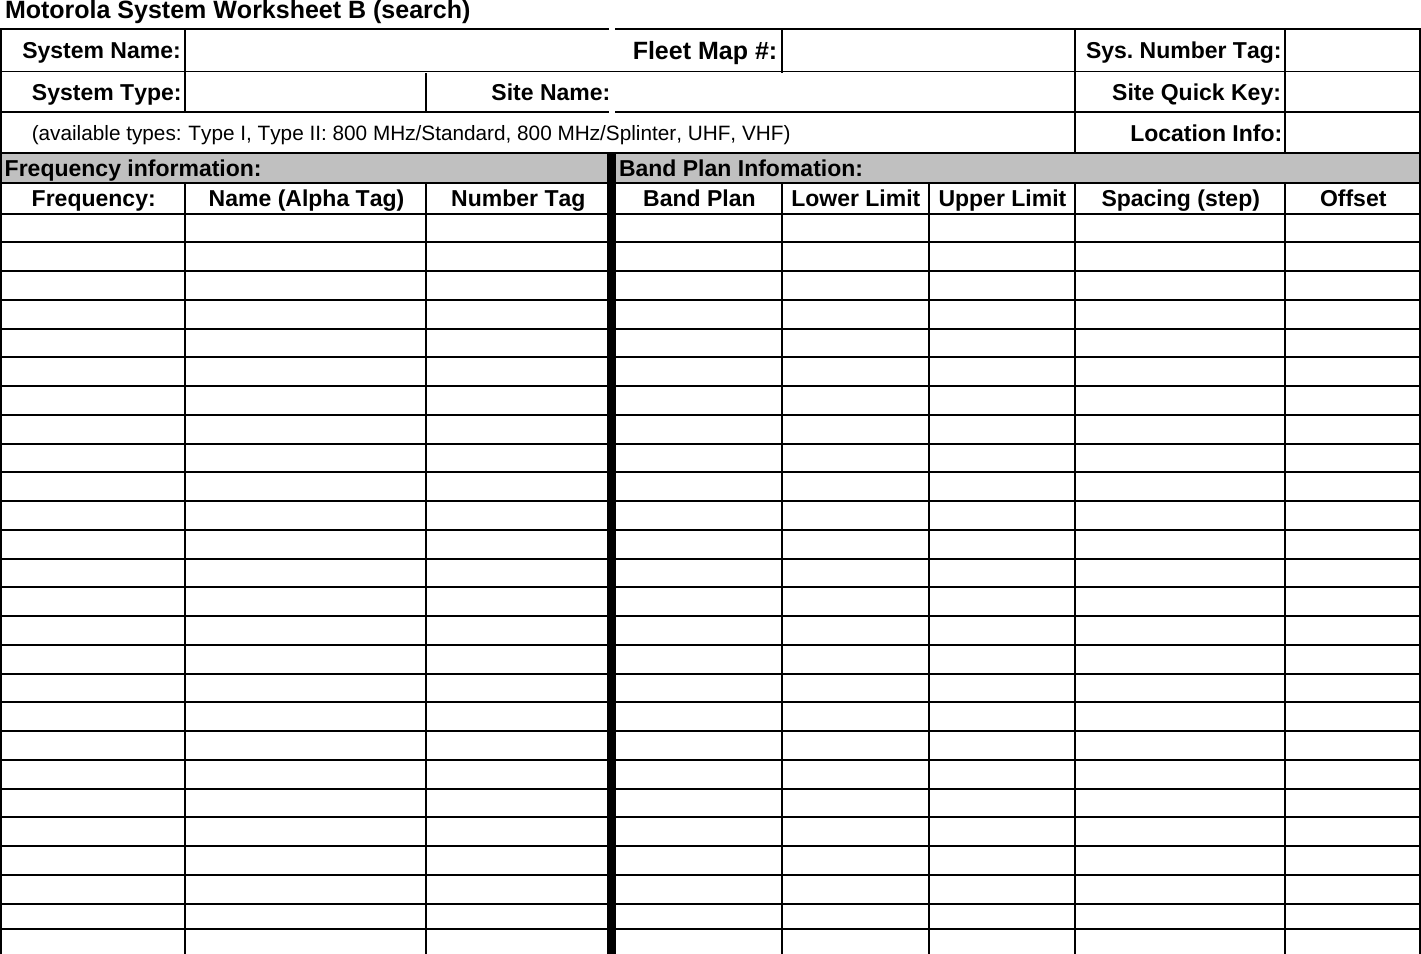 Motorola System Worksheet B (search)System Name: Fleet Map #: Sys. Number Tag:System Type: Site Name: Site Quick Key:(available types: Type I, Type II: 800 MHz/Standard, 800 MHz/Splinter, UHF, VHF) Location Info:Frequency information: Band Plan Infomation:Frequency: Name (Alpha Tag) Number Tag Band Plan Lower Limit Upper Limit Spacing (step) Offset